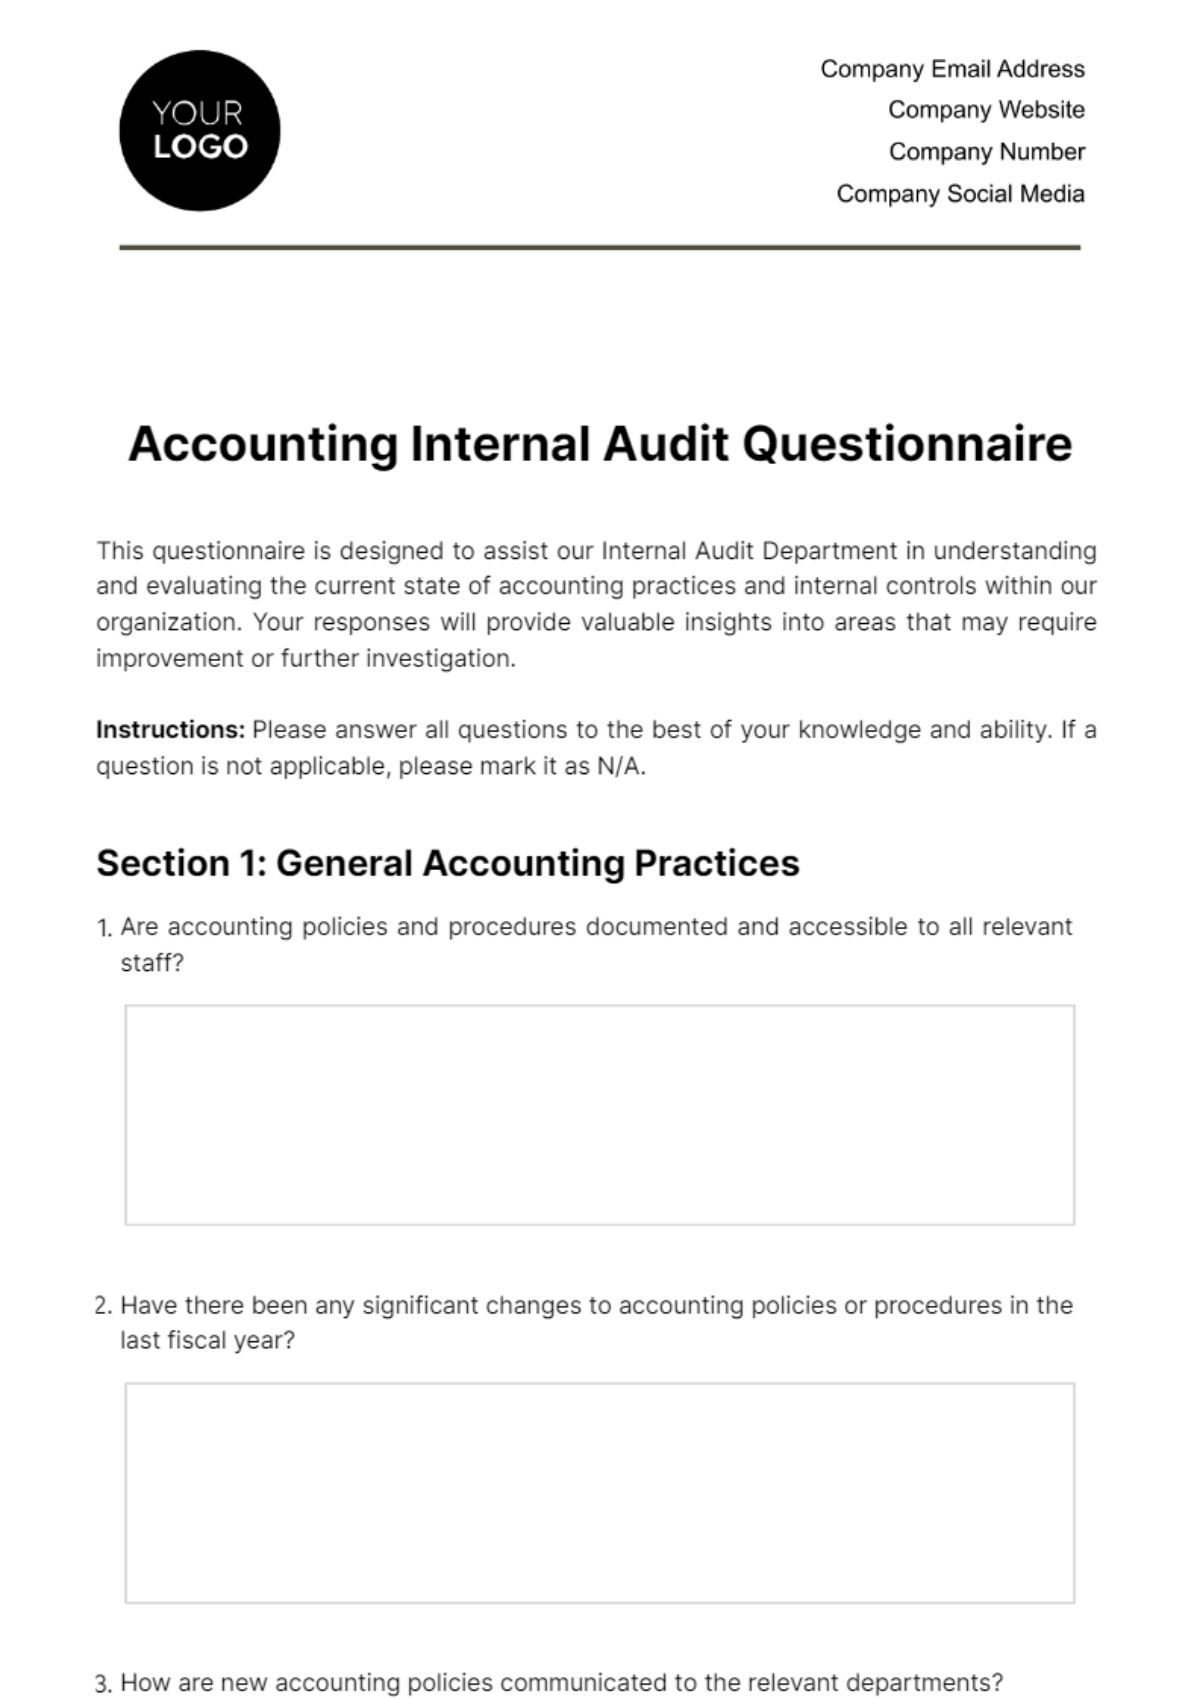 Accounting Internal Audit Questionnaire Template